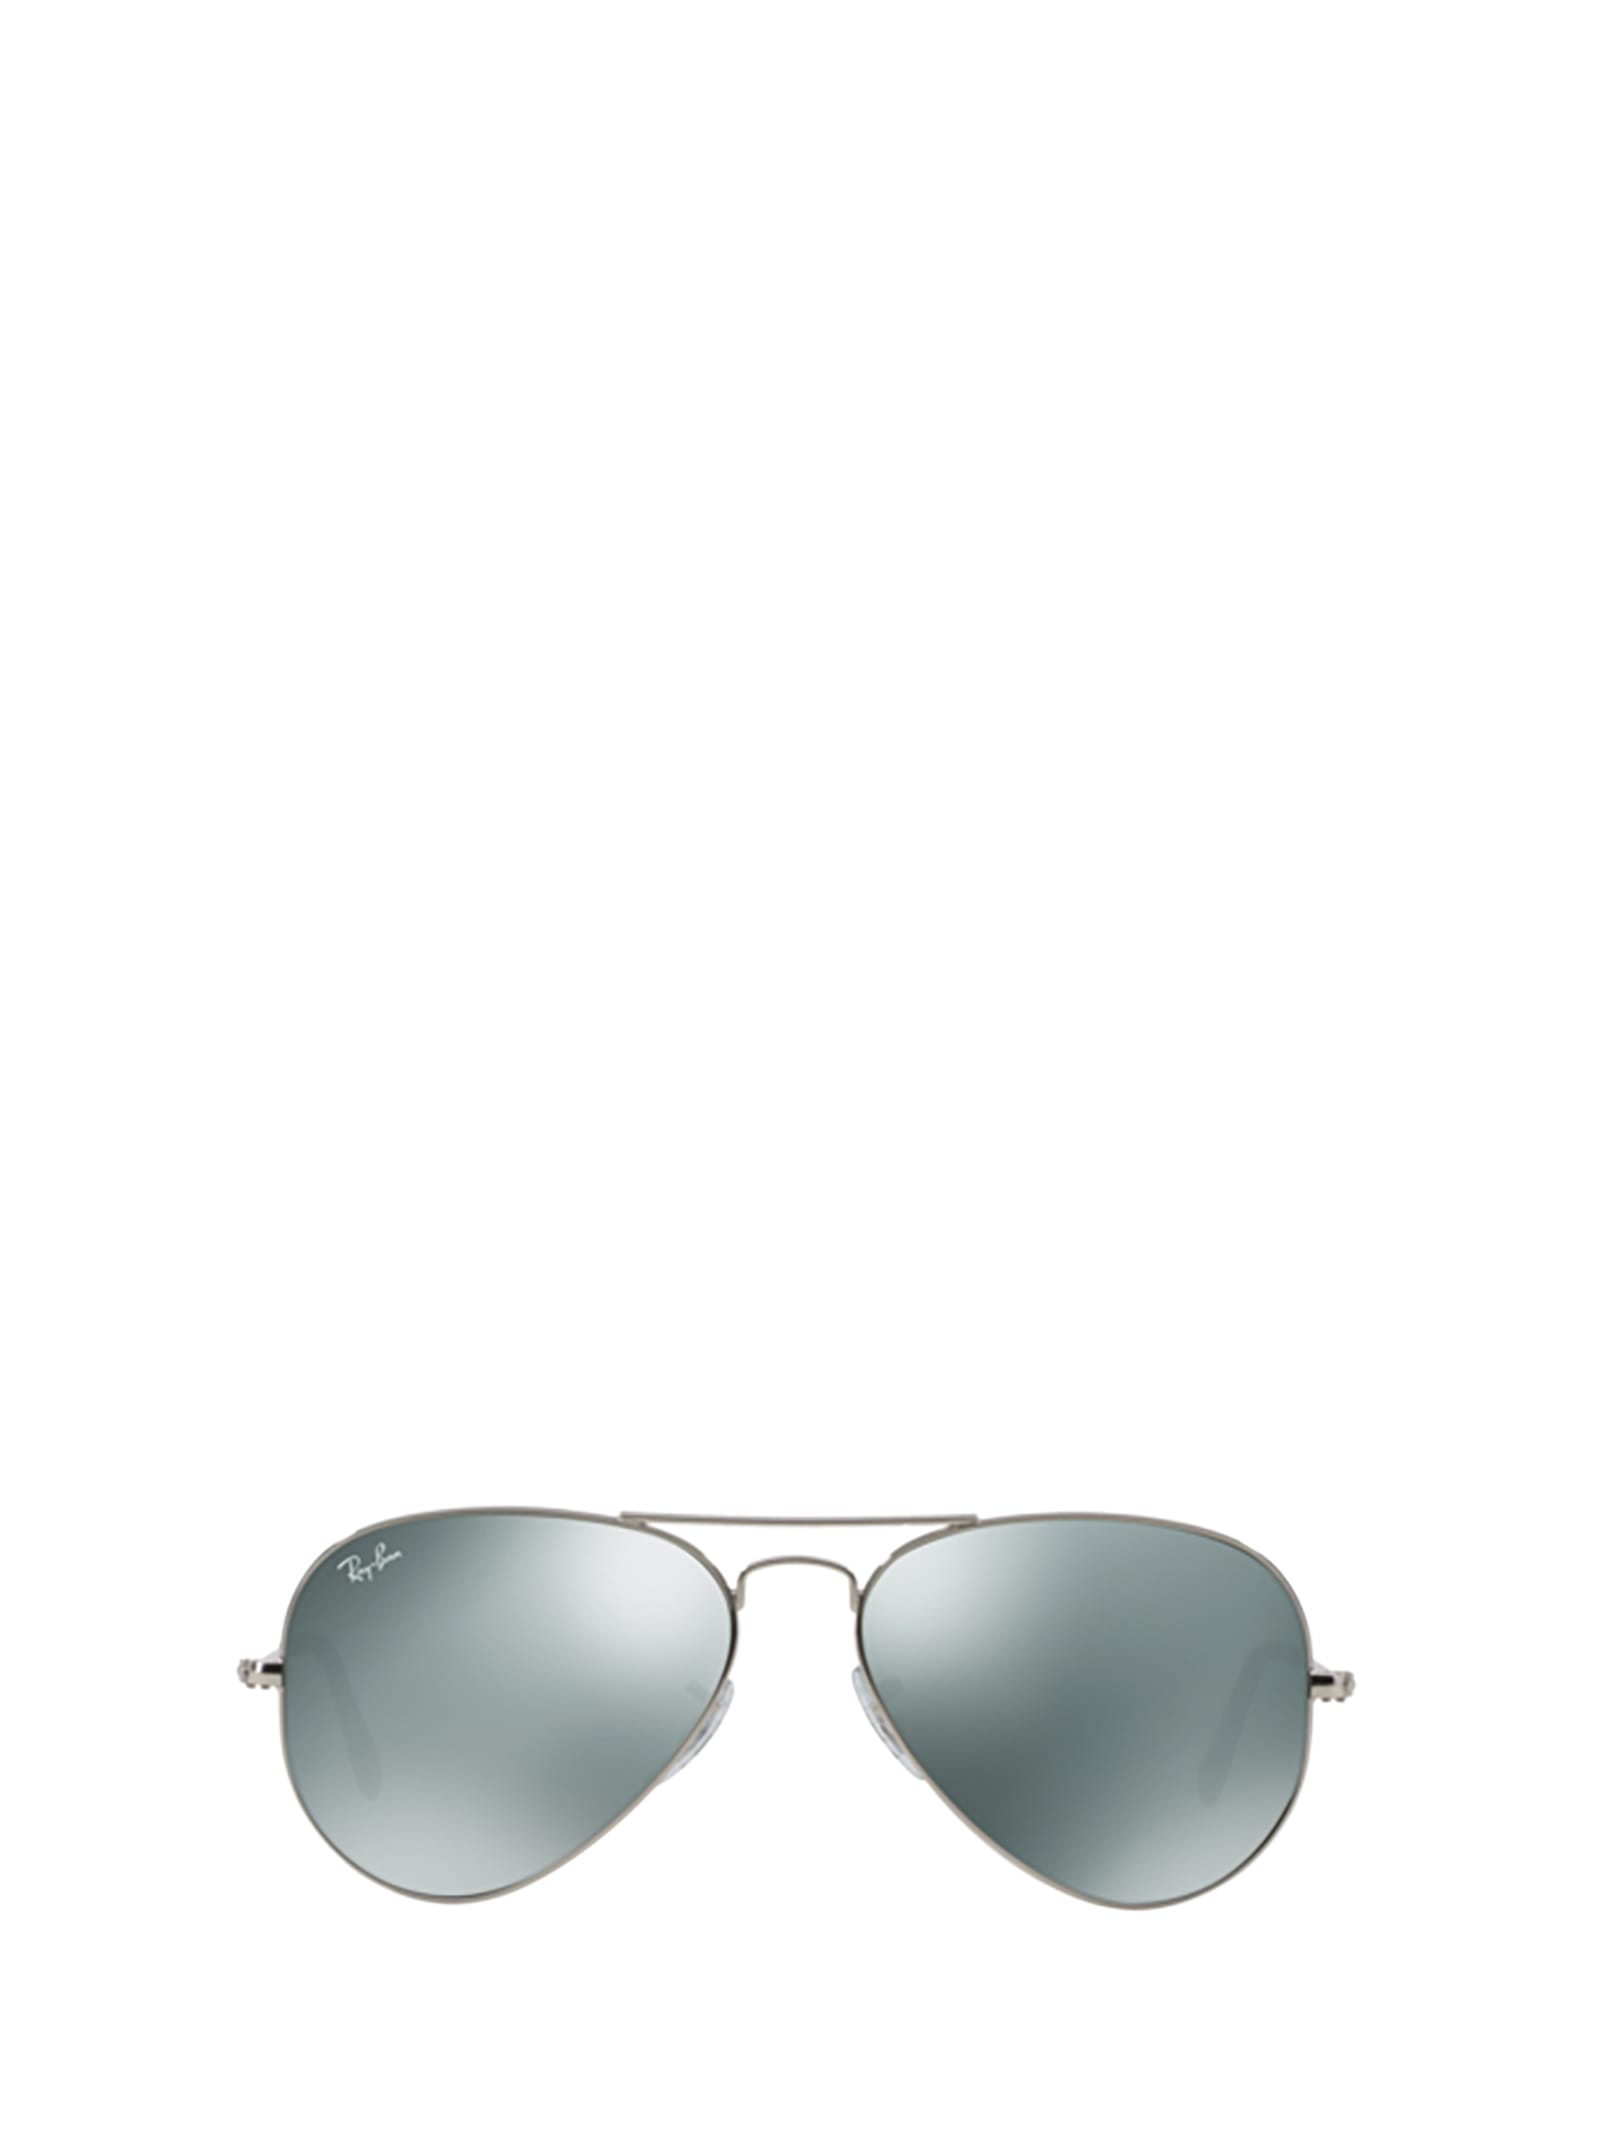 RAY BAN RAY-BAN RB3025 SILVER SUNGLASSES,RB3025 W3275